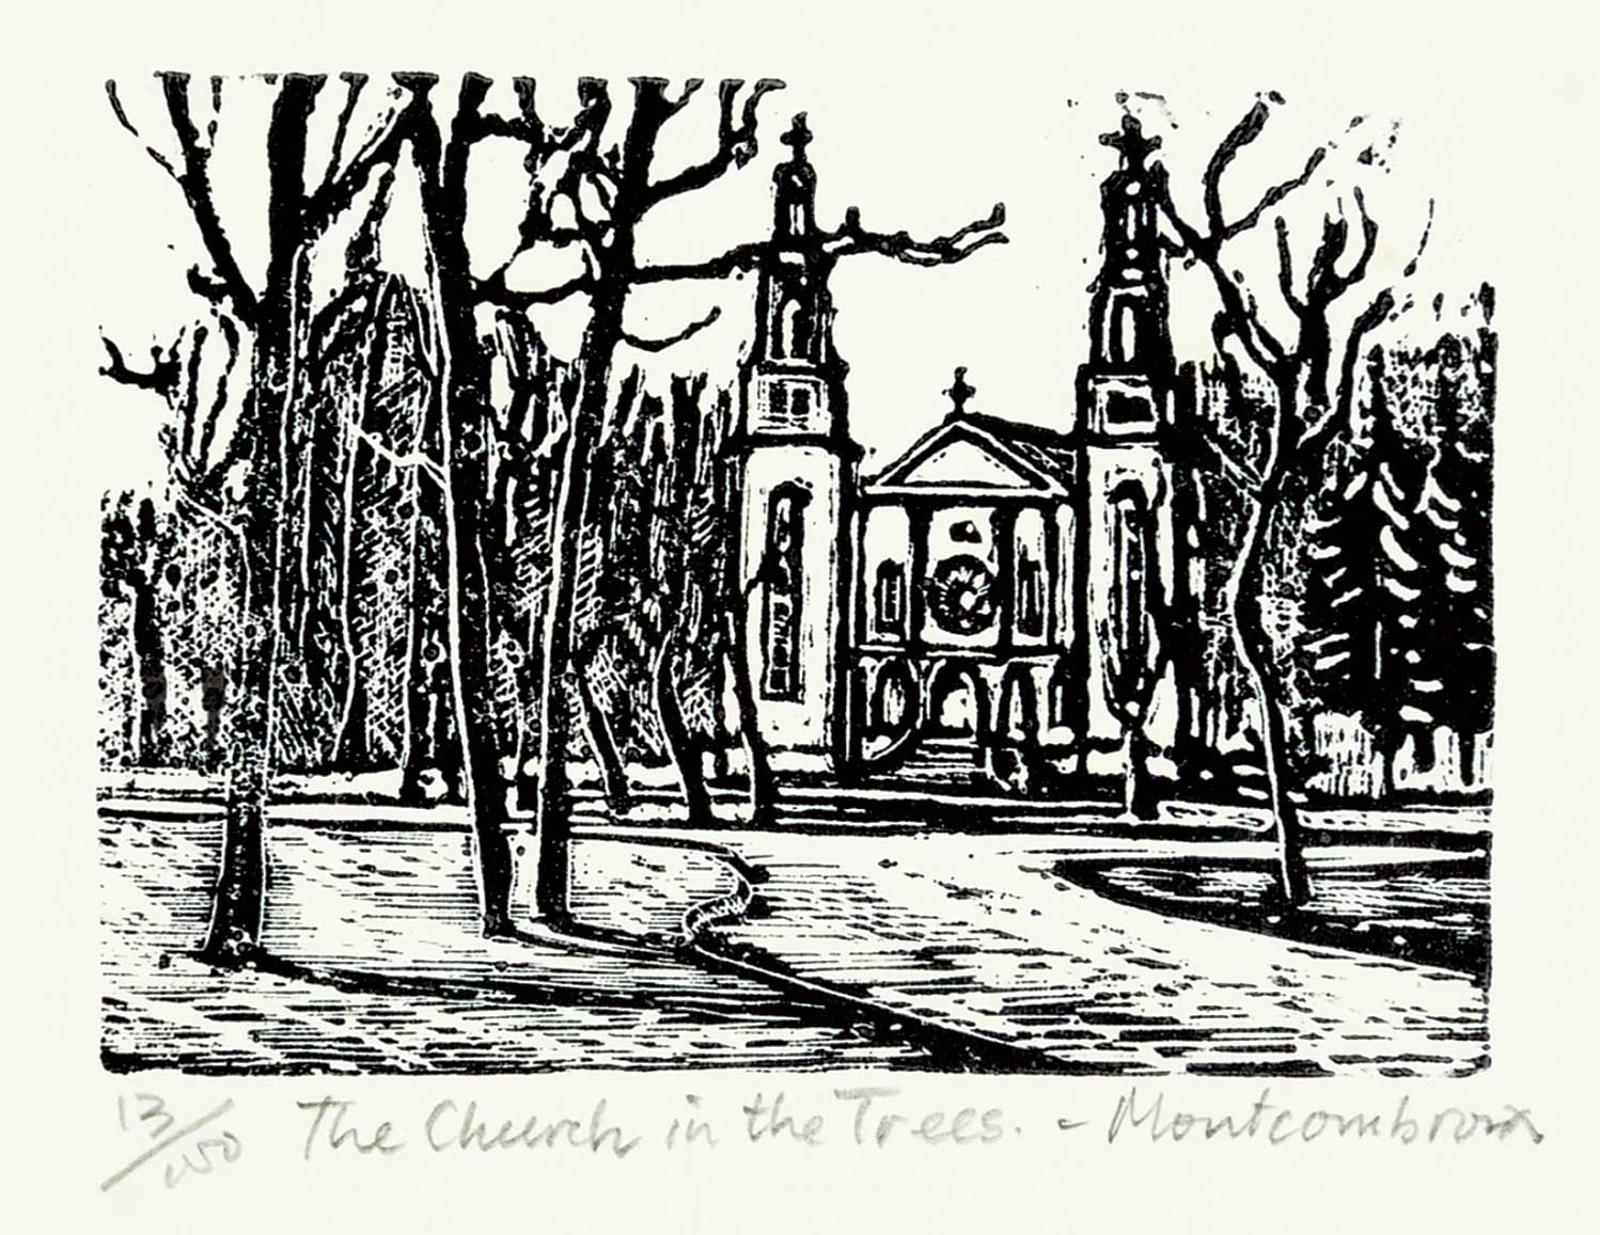 Michael Montcombroux - The Church in the Trees  #13/100